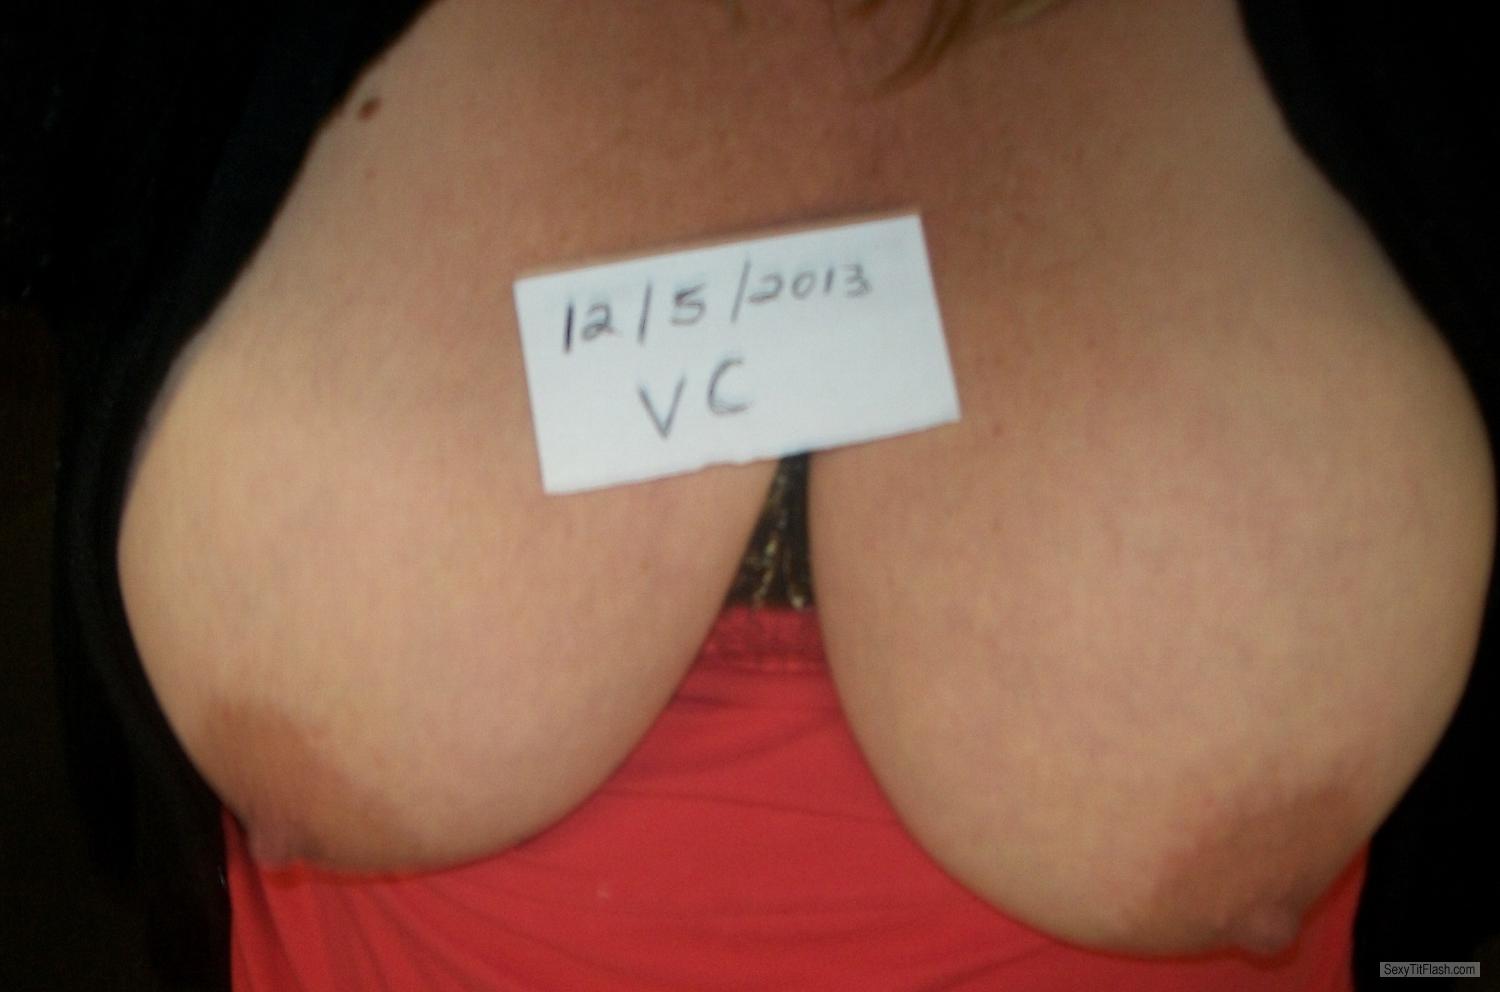 Tit Flash: My Extremely Big Tits (Selfie) - KTX from United States